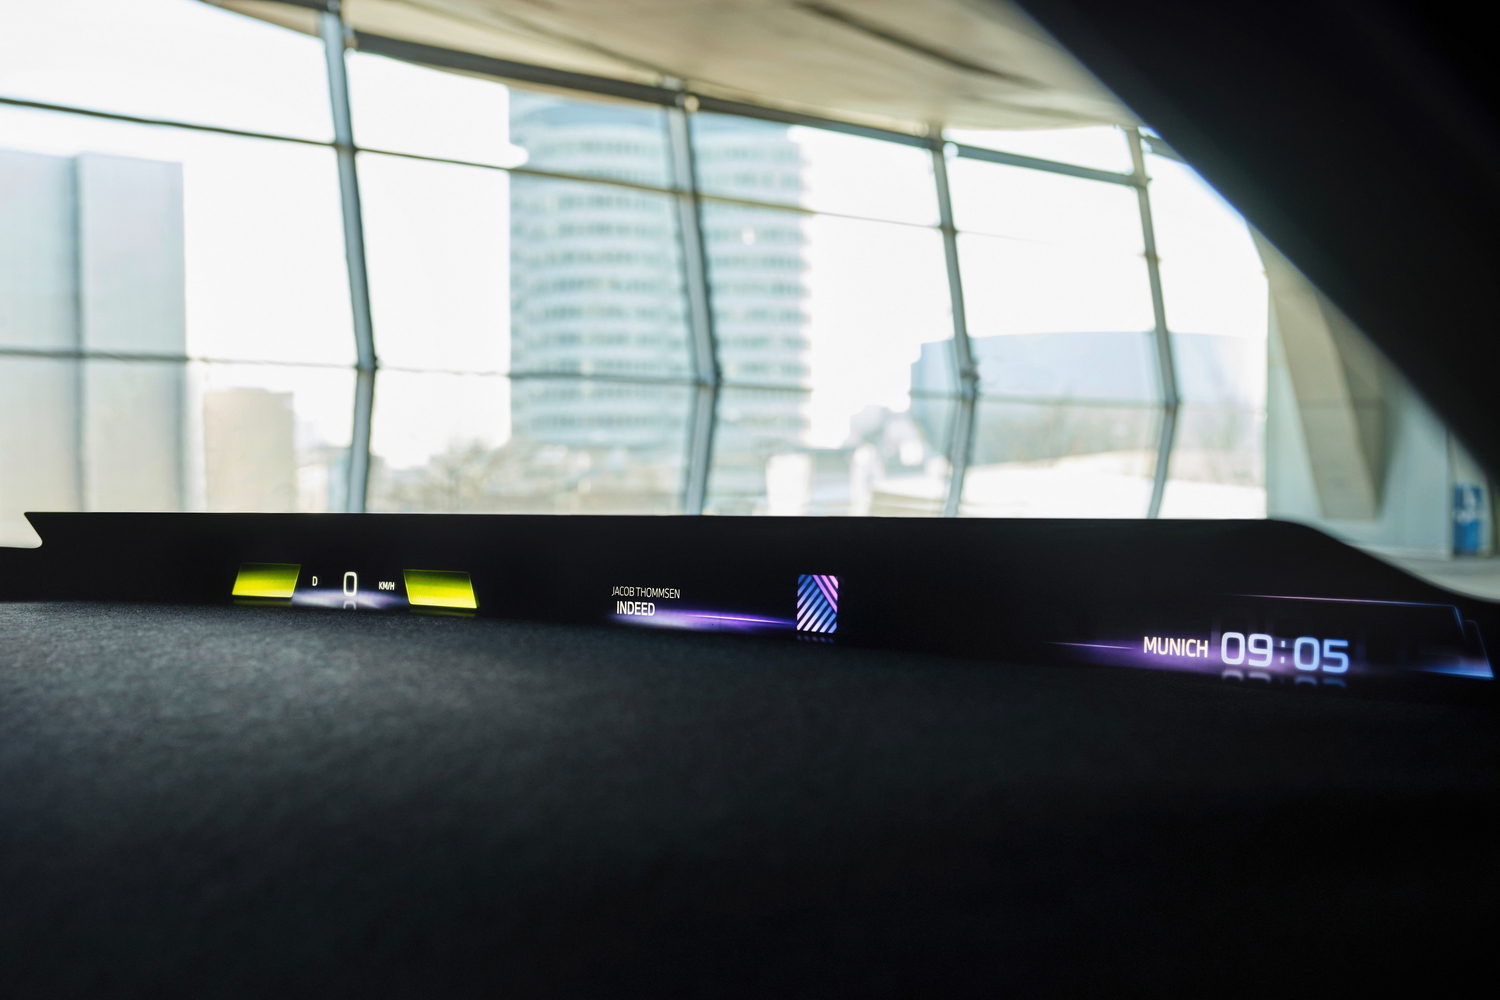 Car News | BMW Panoramic Vision extends head-up display | CompleteCar.ie